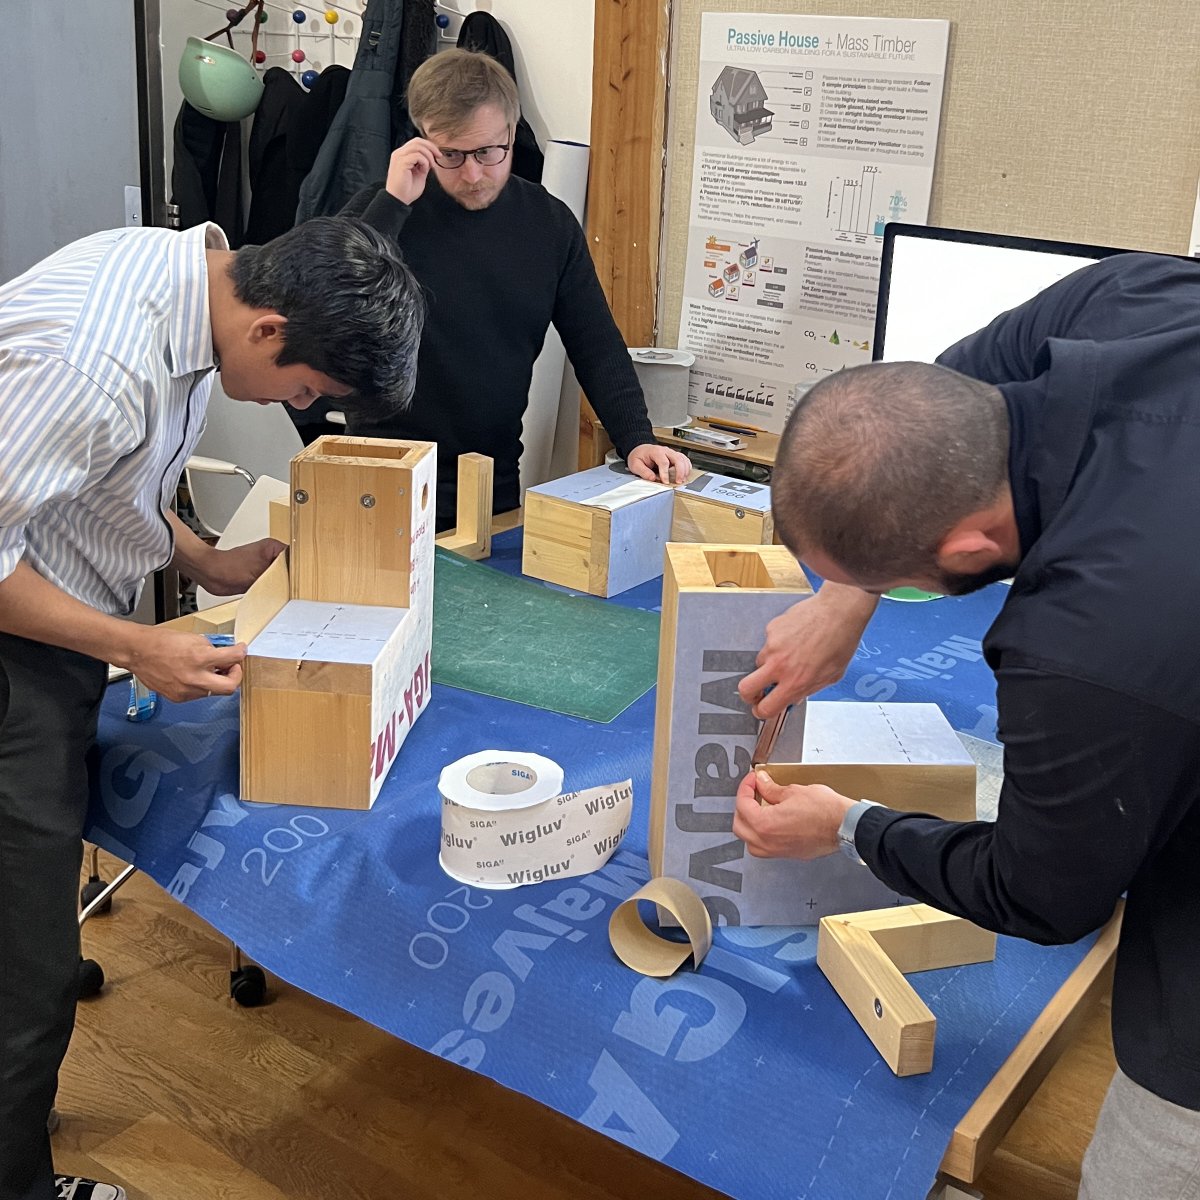 🏠✨ 'Wigluv tape demo: Sealing the deal on zero energy loss! 🌬️💡 
The most fun Lunch & Learn #SigaProducts #siga_north_america #EnergyEfficiency #ZHarchitects #Architecture #PassiveHouse #MassTimber #LowEnergyStrategies #airtight #weathertight